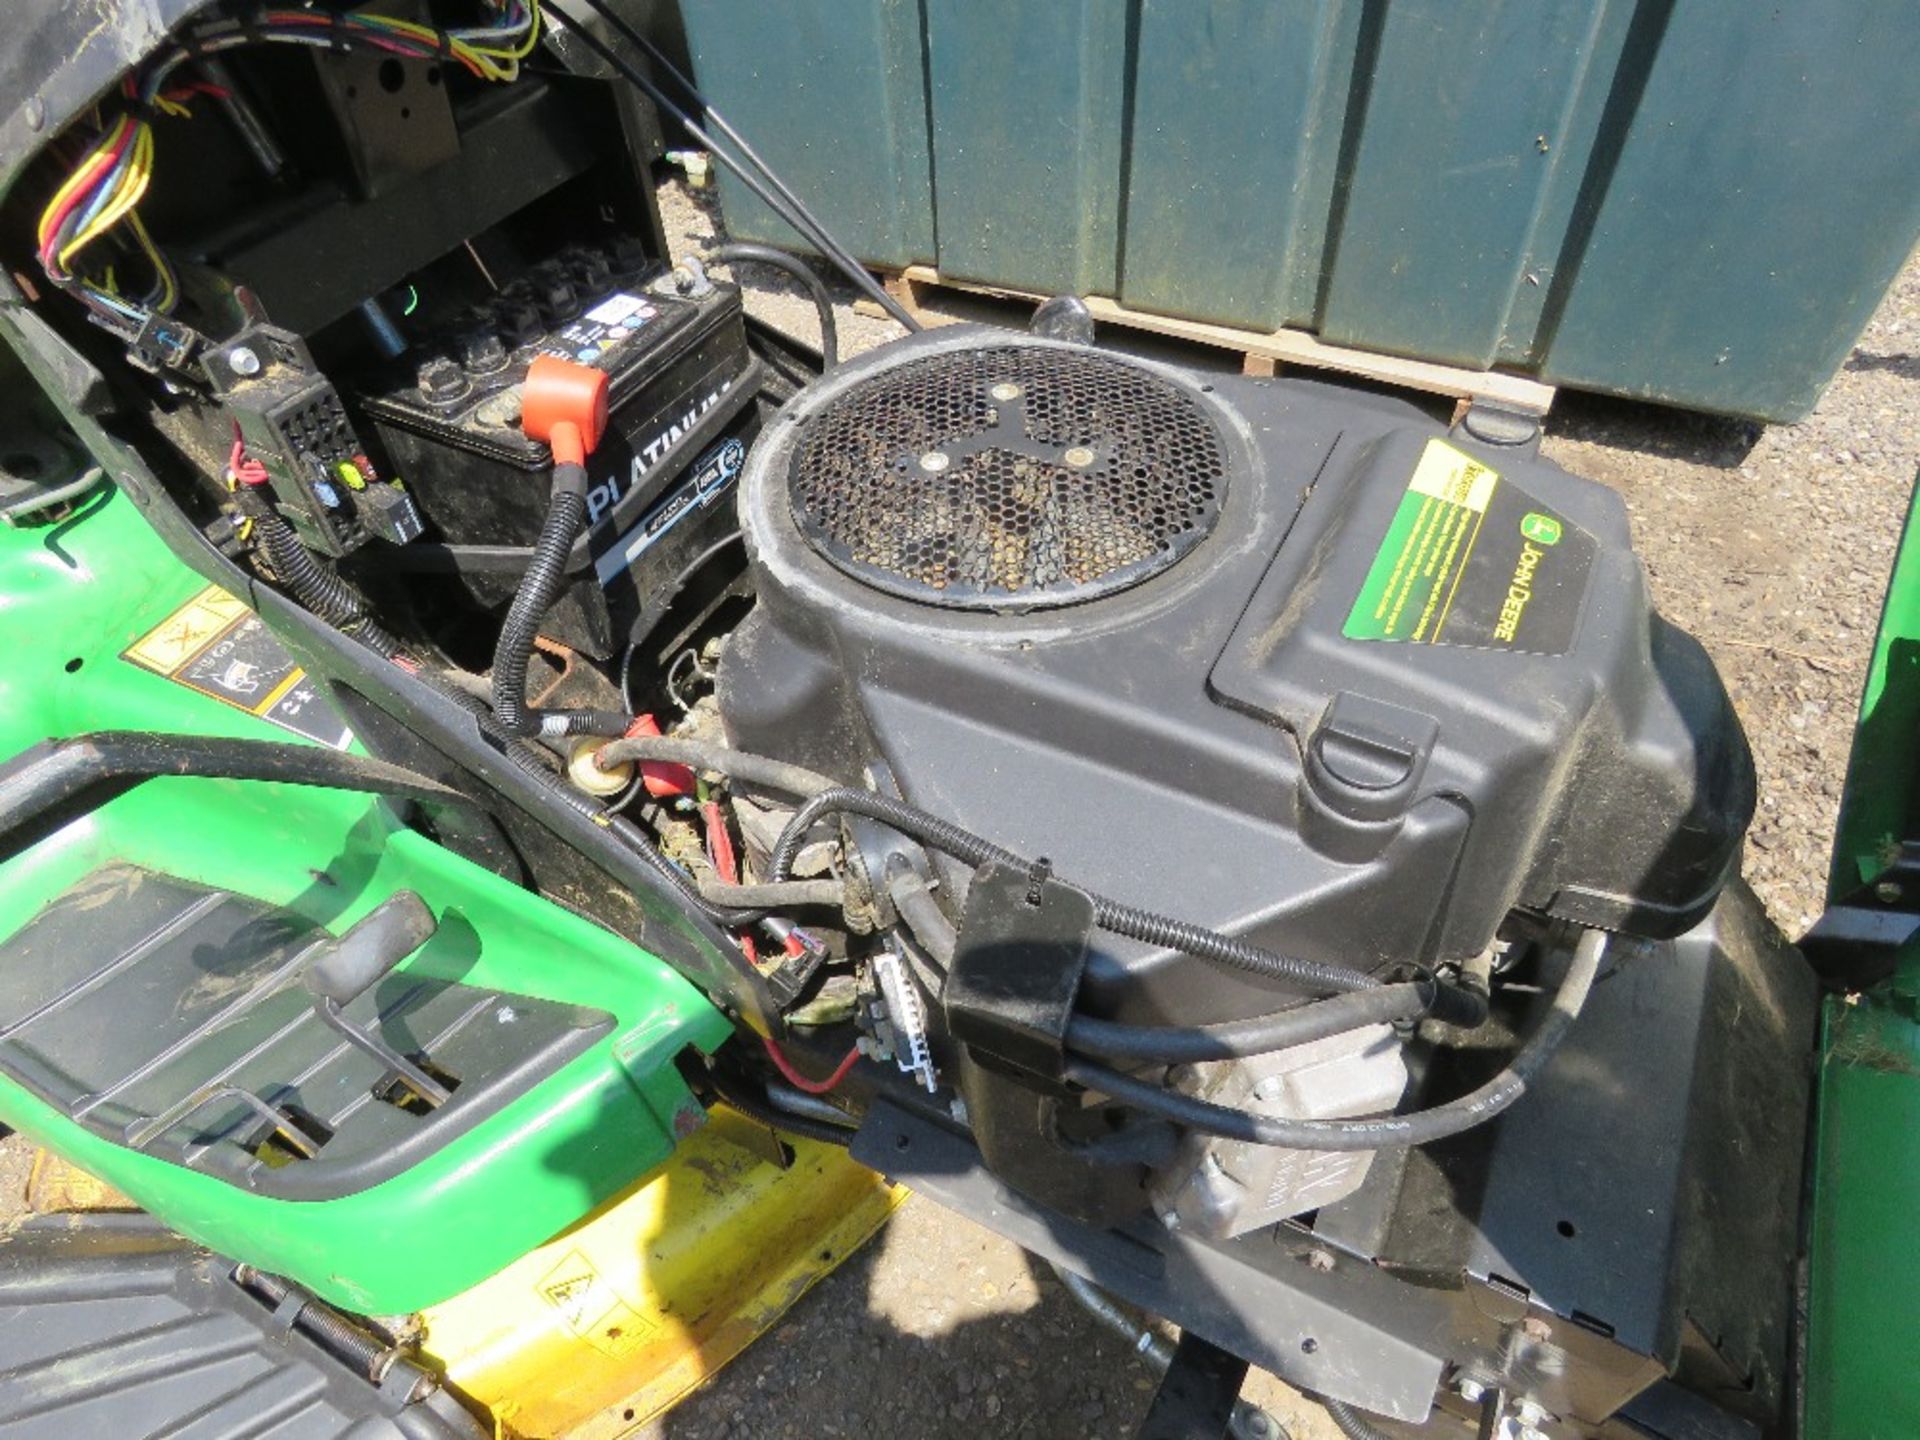 JOHN DEERE X320 PETROL RIDE ON MOWER, 756 REC HOURS. RUNS AND DRIVES BUT MOWERS NOT ENGAGING...NO BE - Image 11 of 11